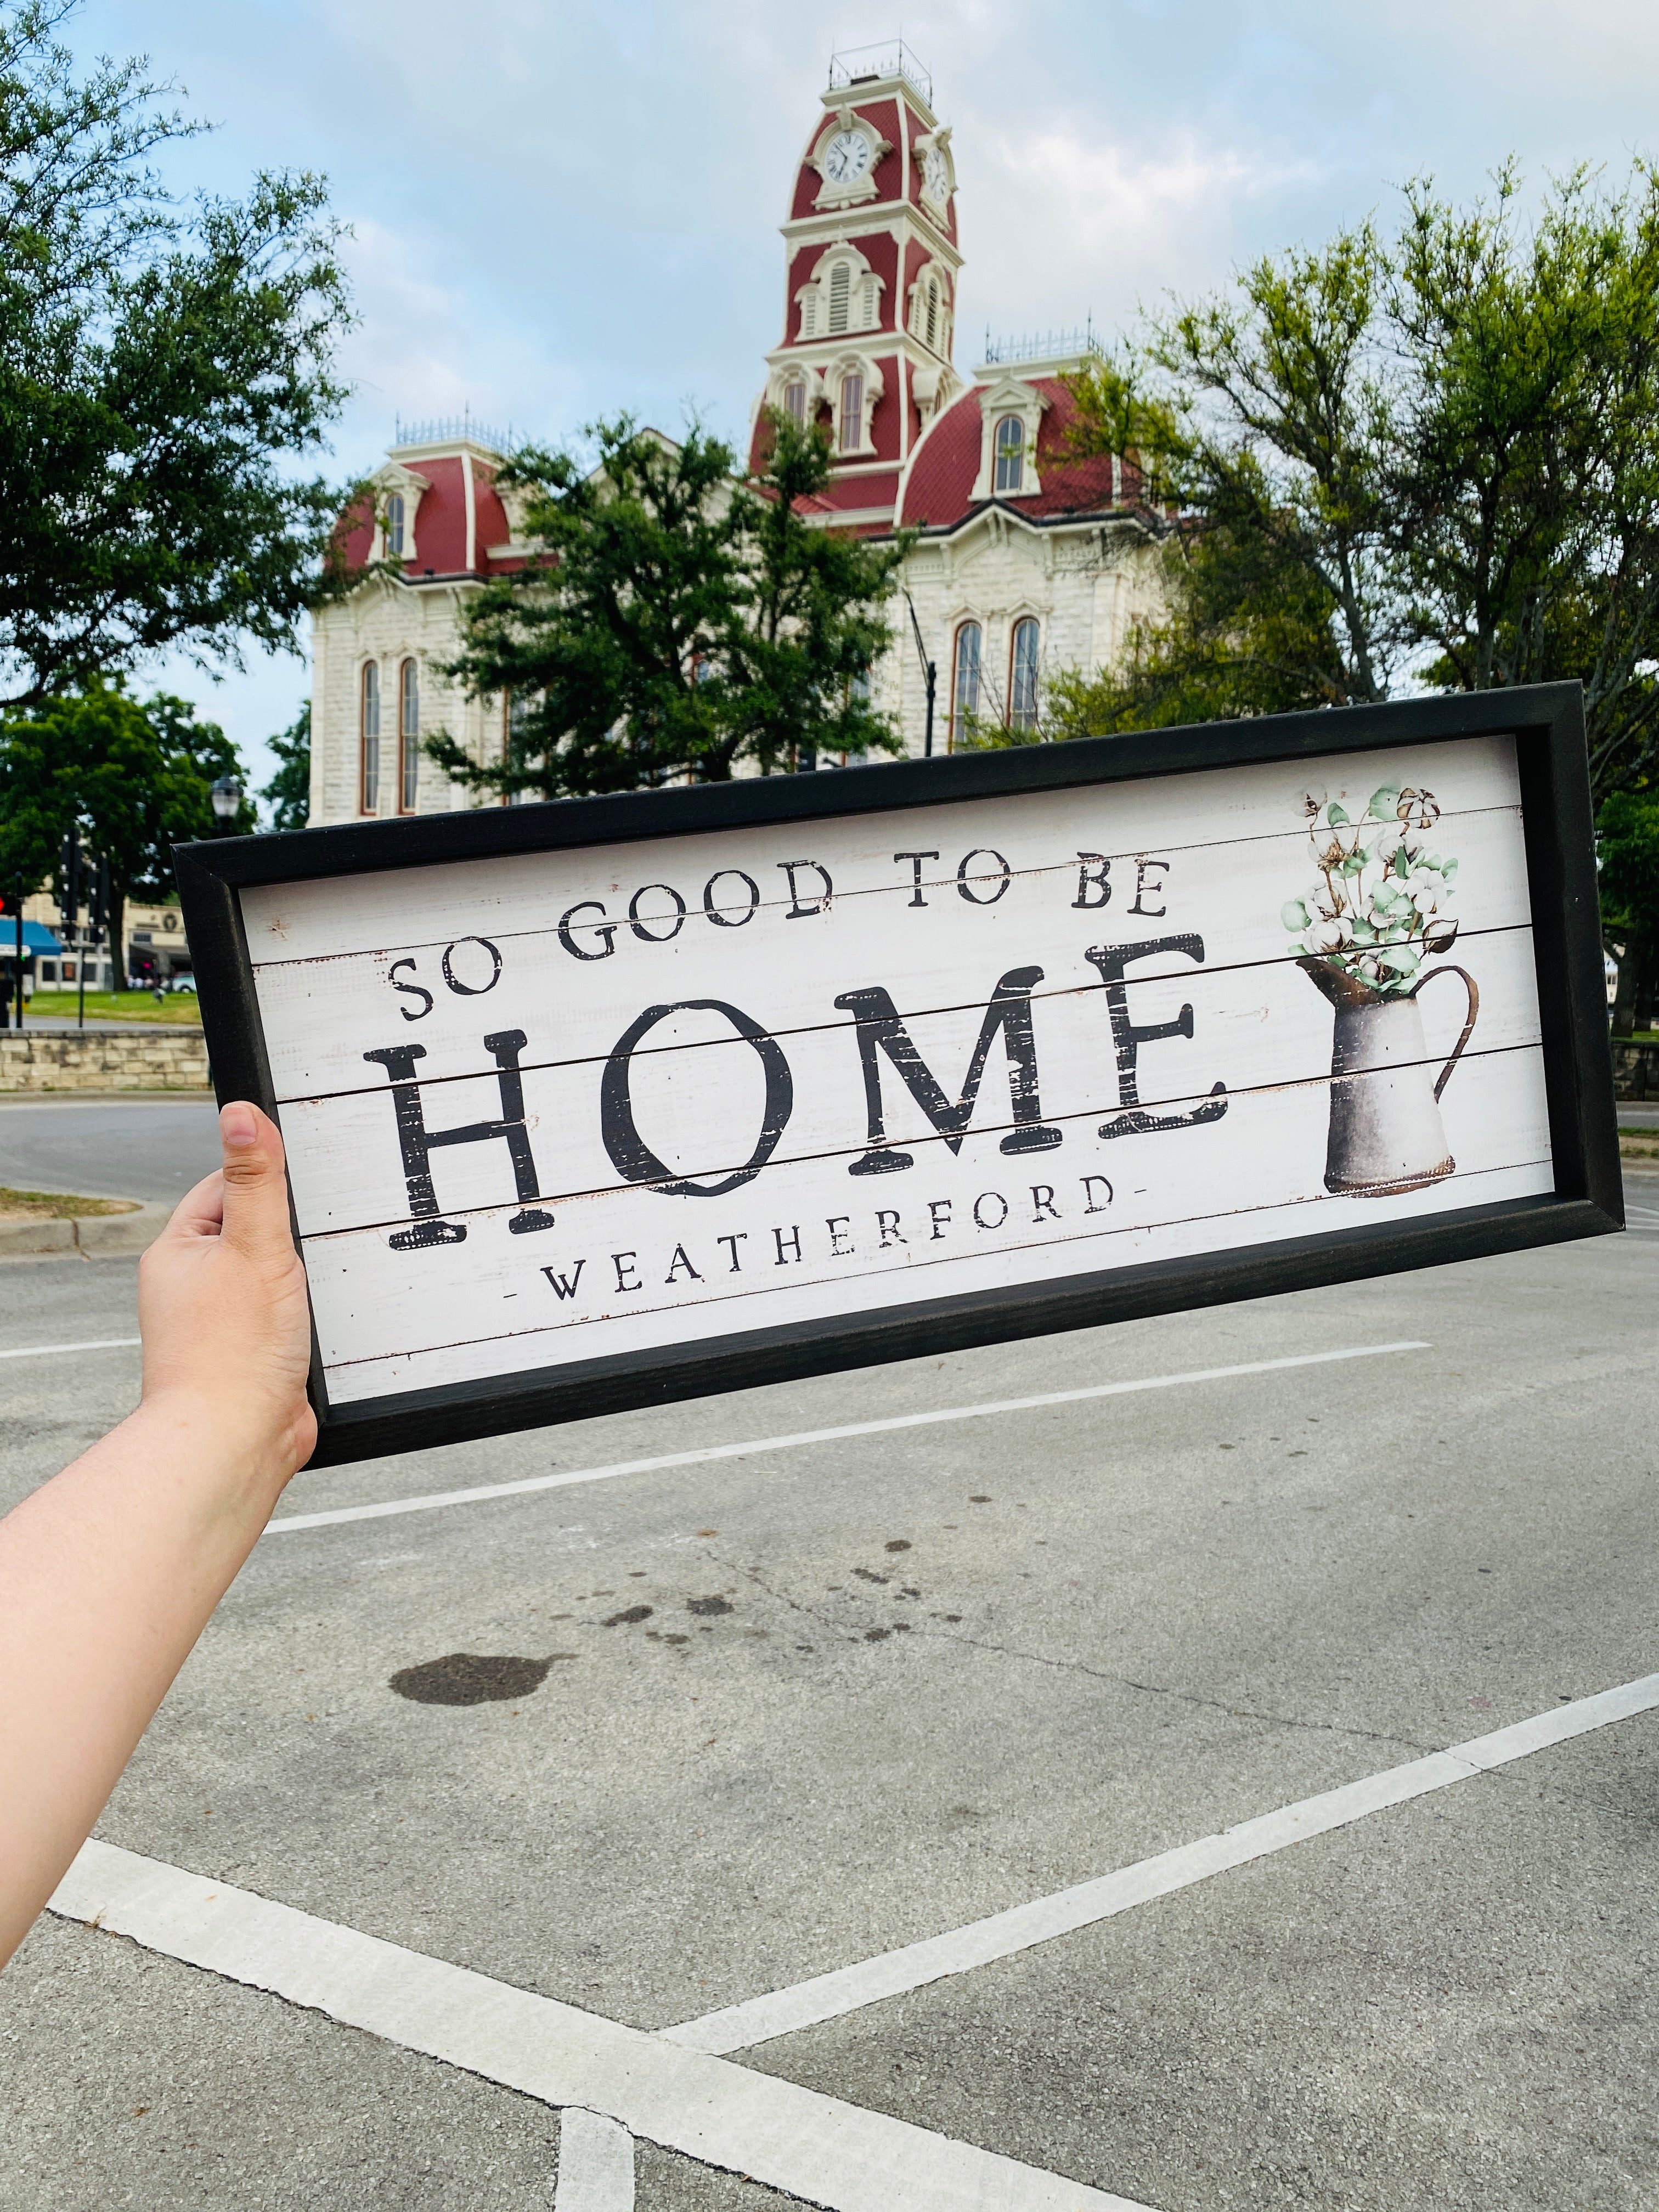 It's So Good To Be Home Cotton Pitcher Weatherford Hanging Sign